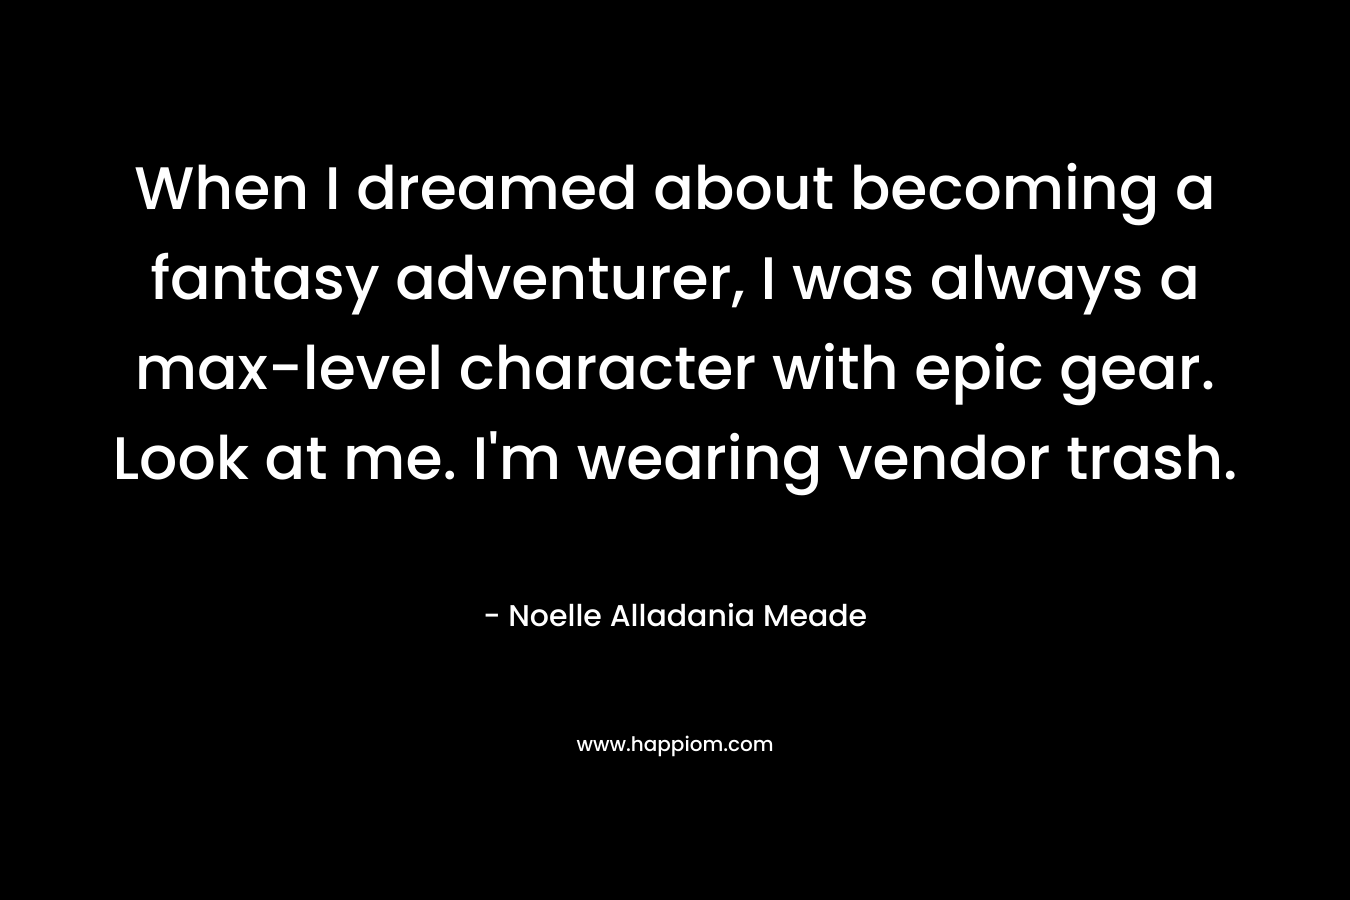 When I dreamed about becoming a fantasy adventurer, I was always a max-level character with epic gear. Look at me. I’m wearing vendor trash. – Noelle Alladania Meade